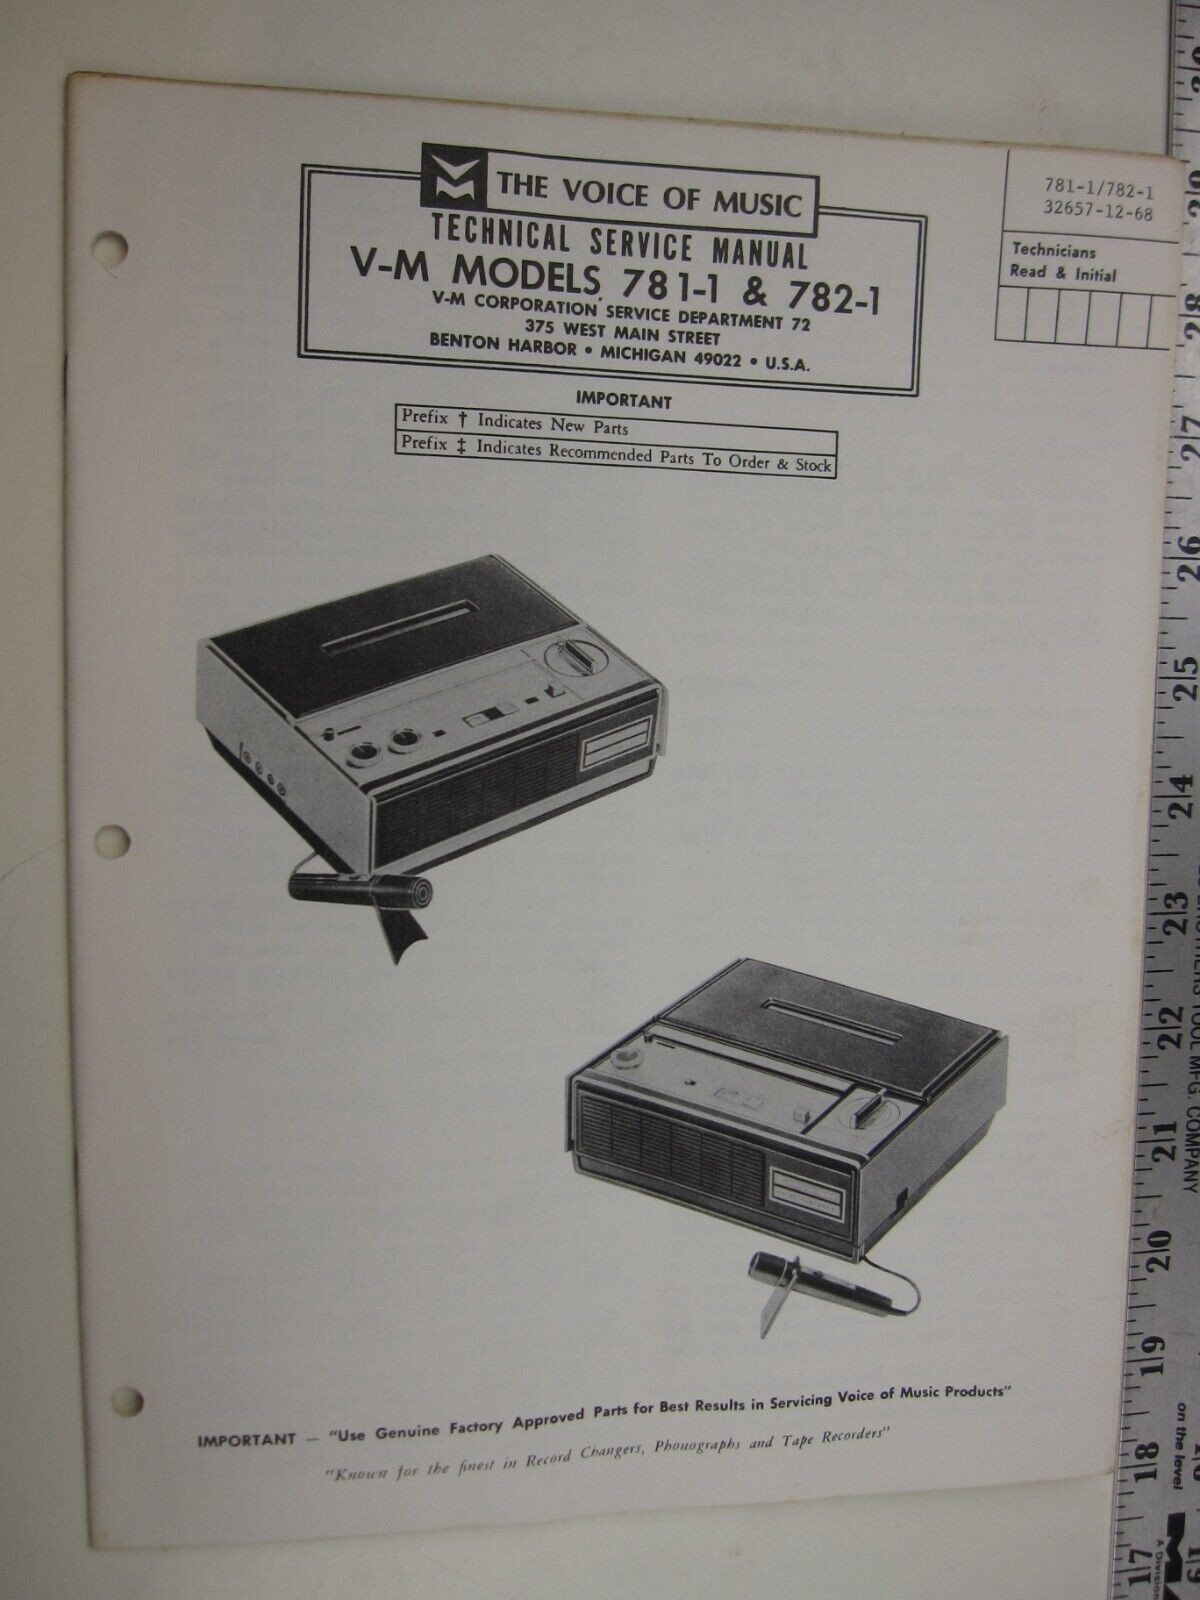 SF 60's V-M Voice of Music Technical Service Manual MODELS 781-1 & 782-1   BIS